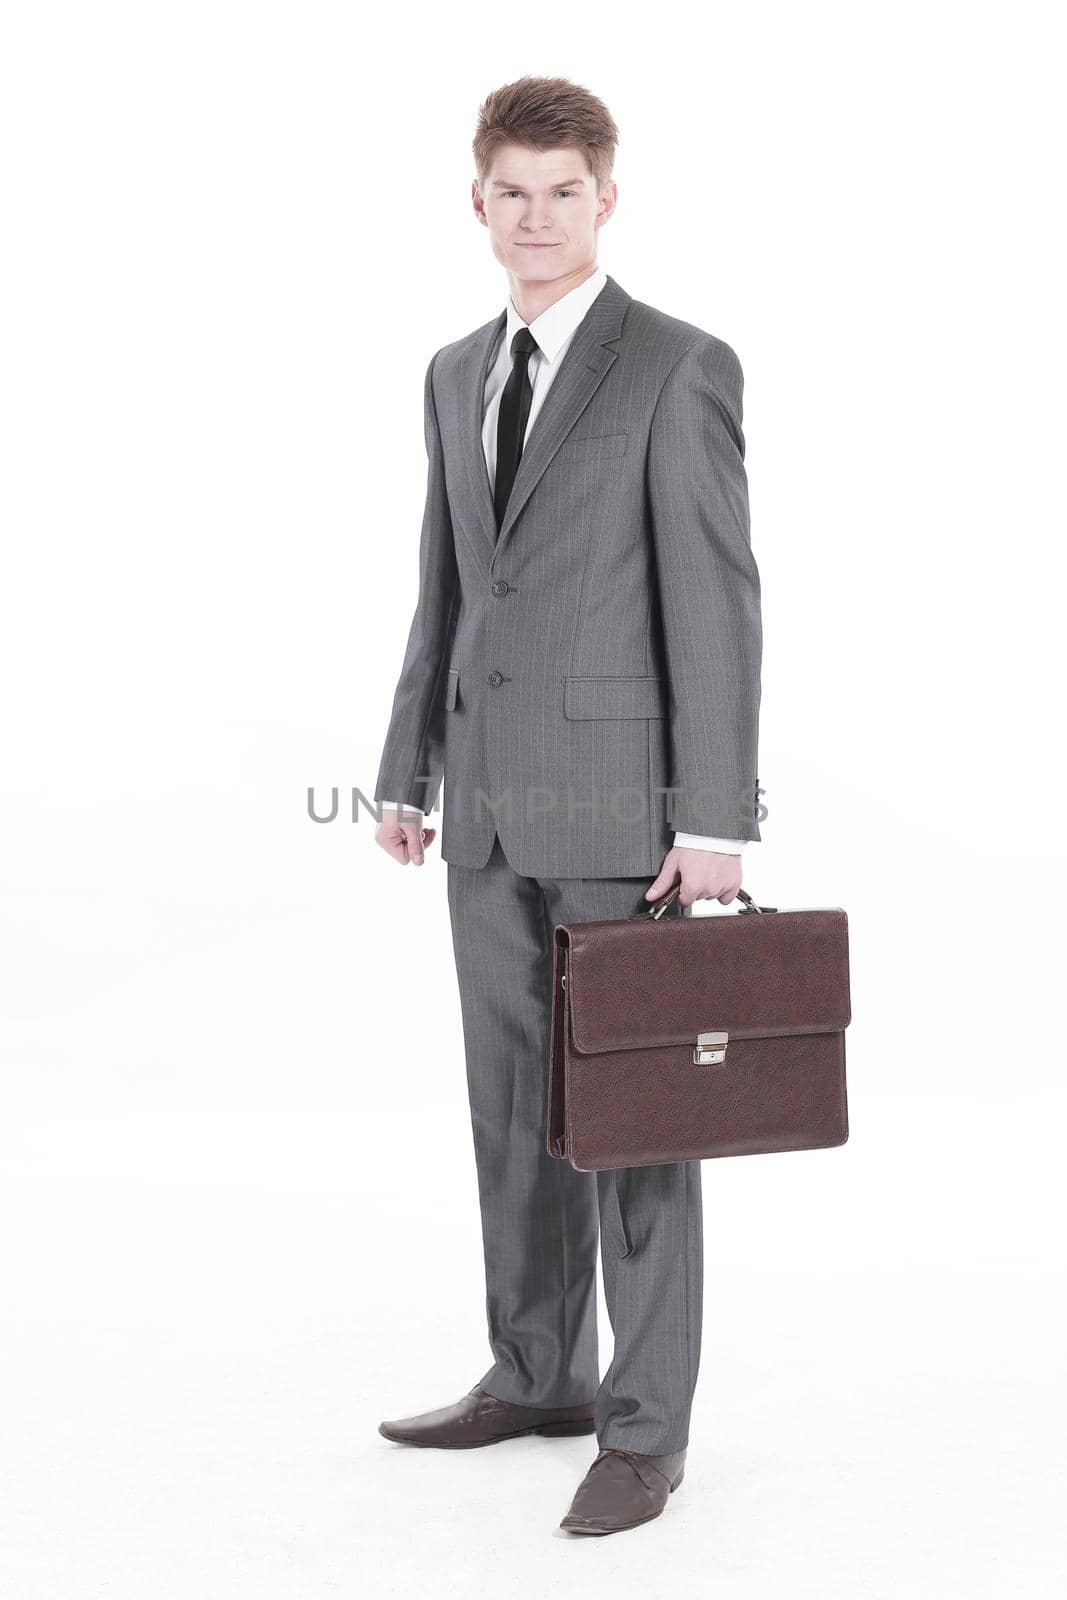 in full growth.young businessman with a leather briefcase.isolated on white background